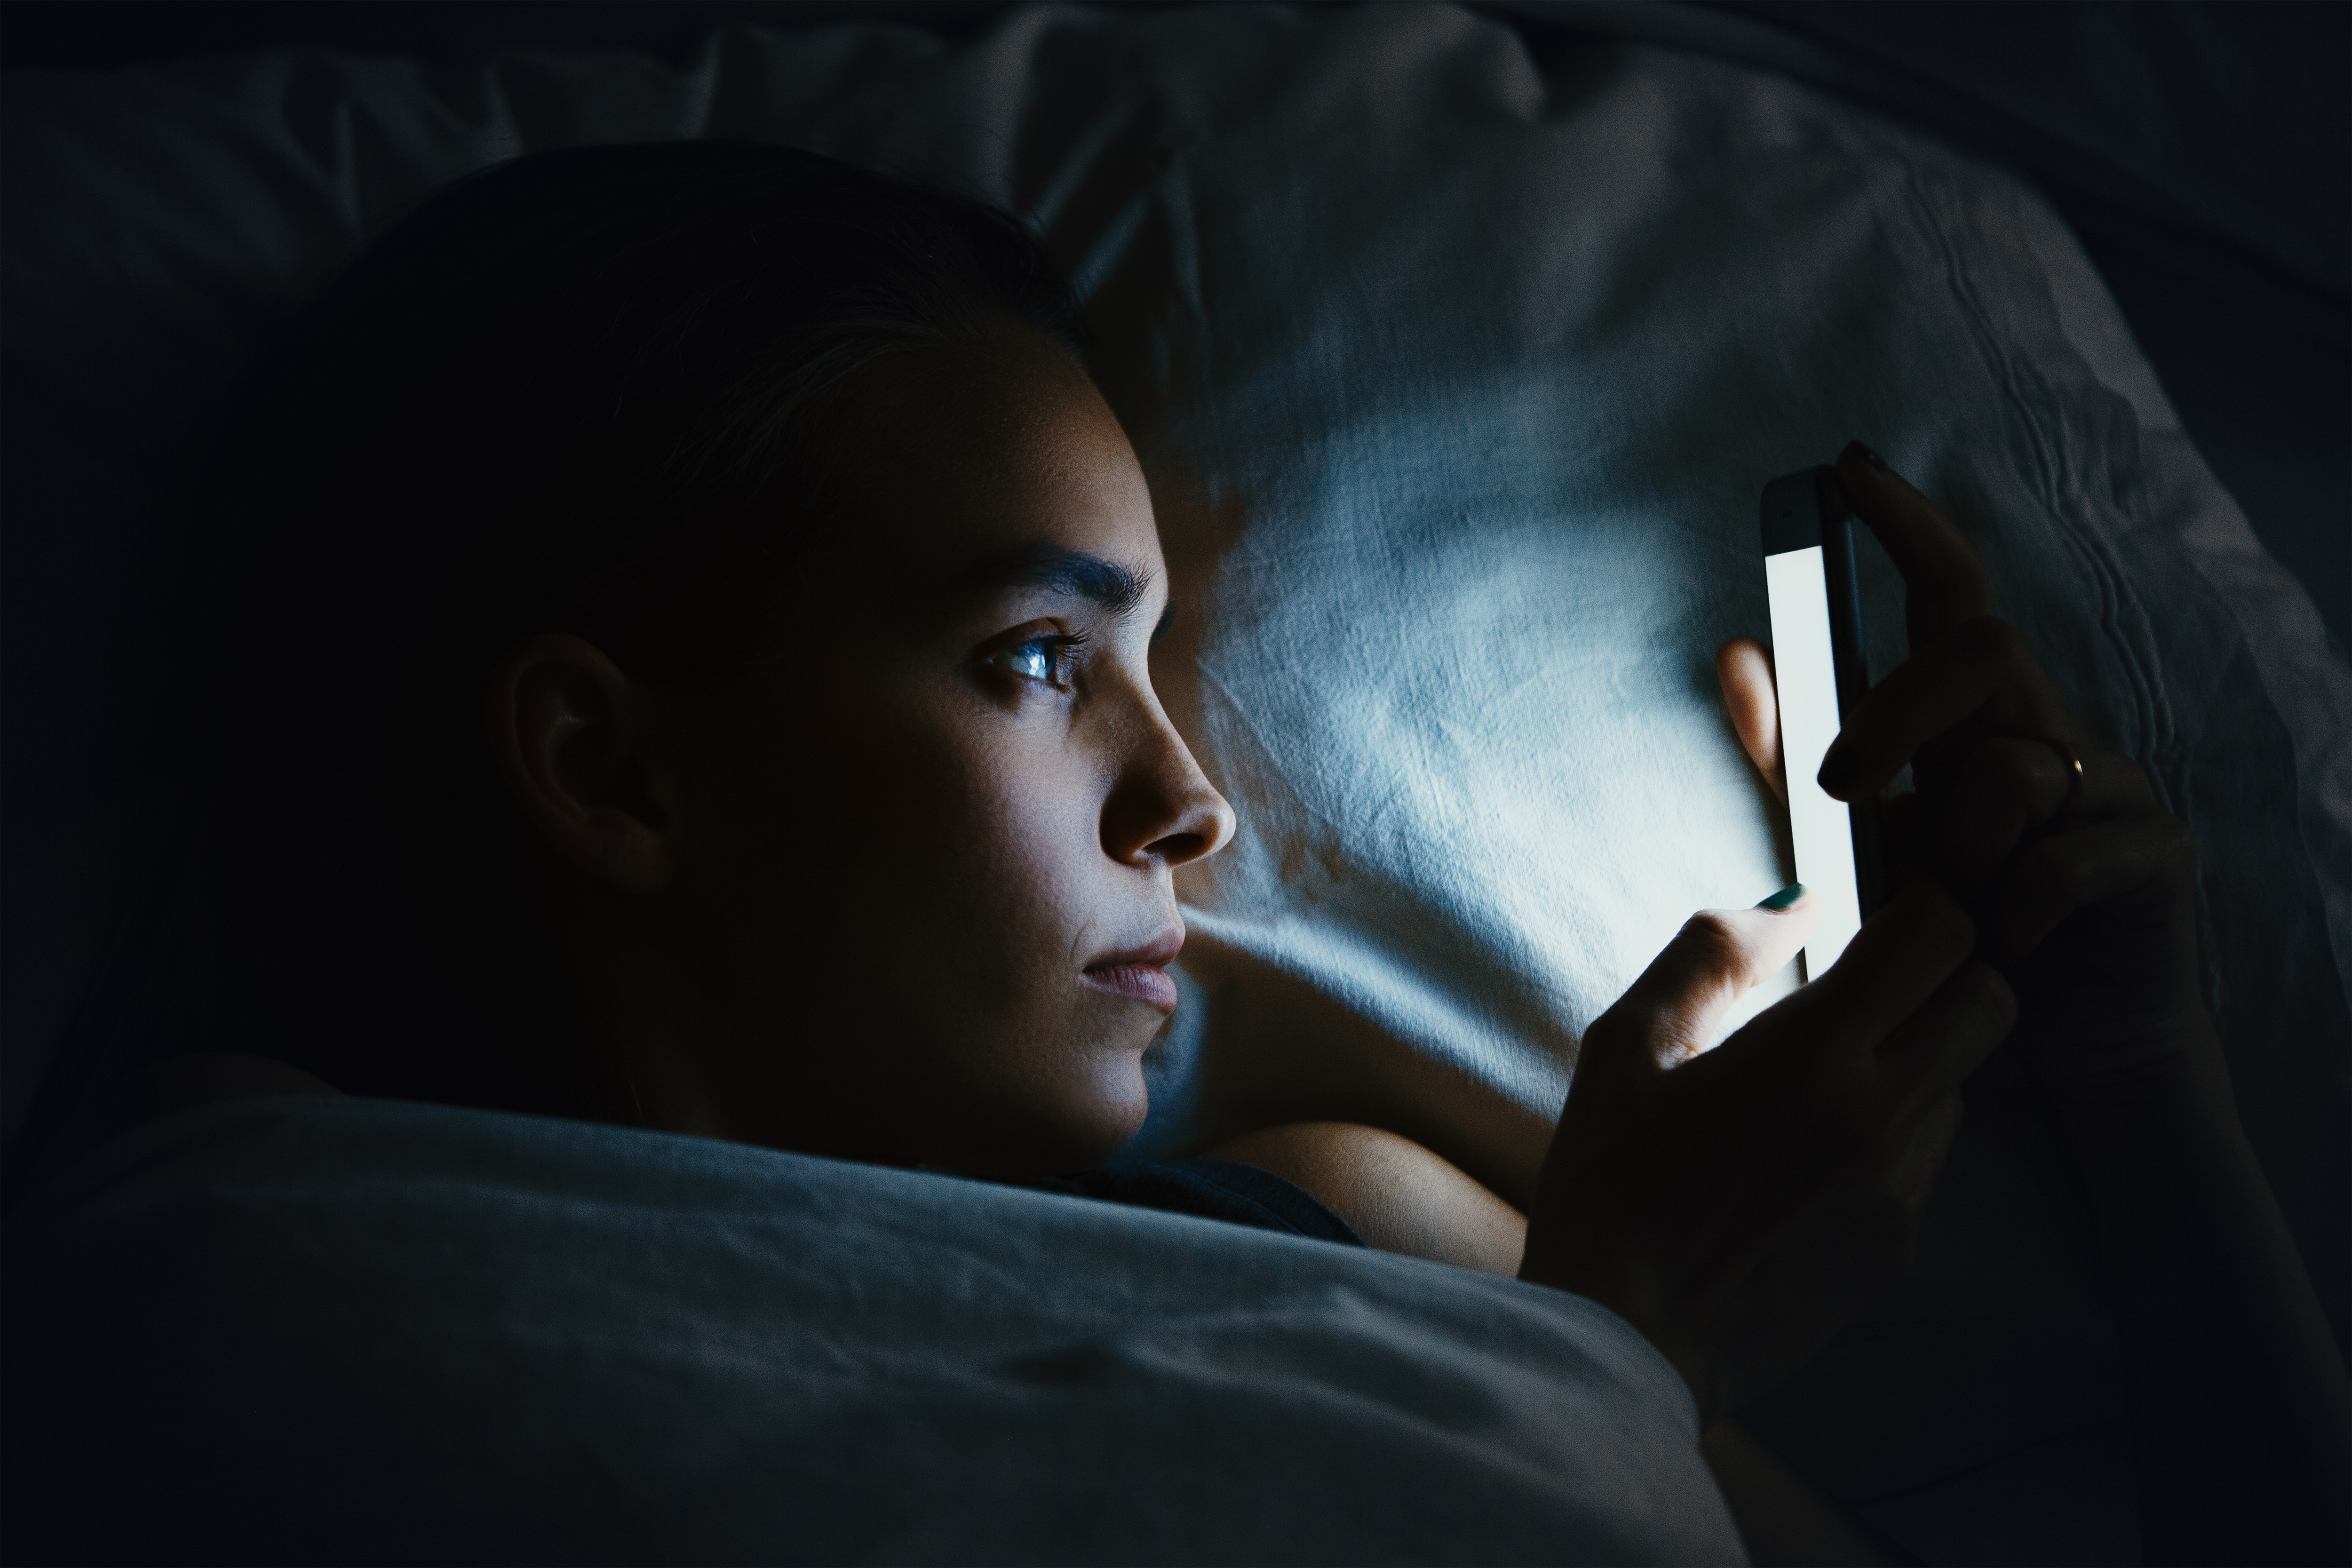 A woman on her phone while in bed | Source: Shutterstock